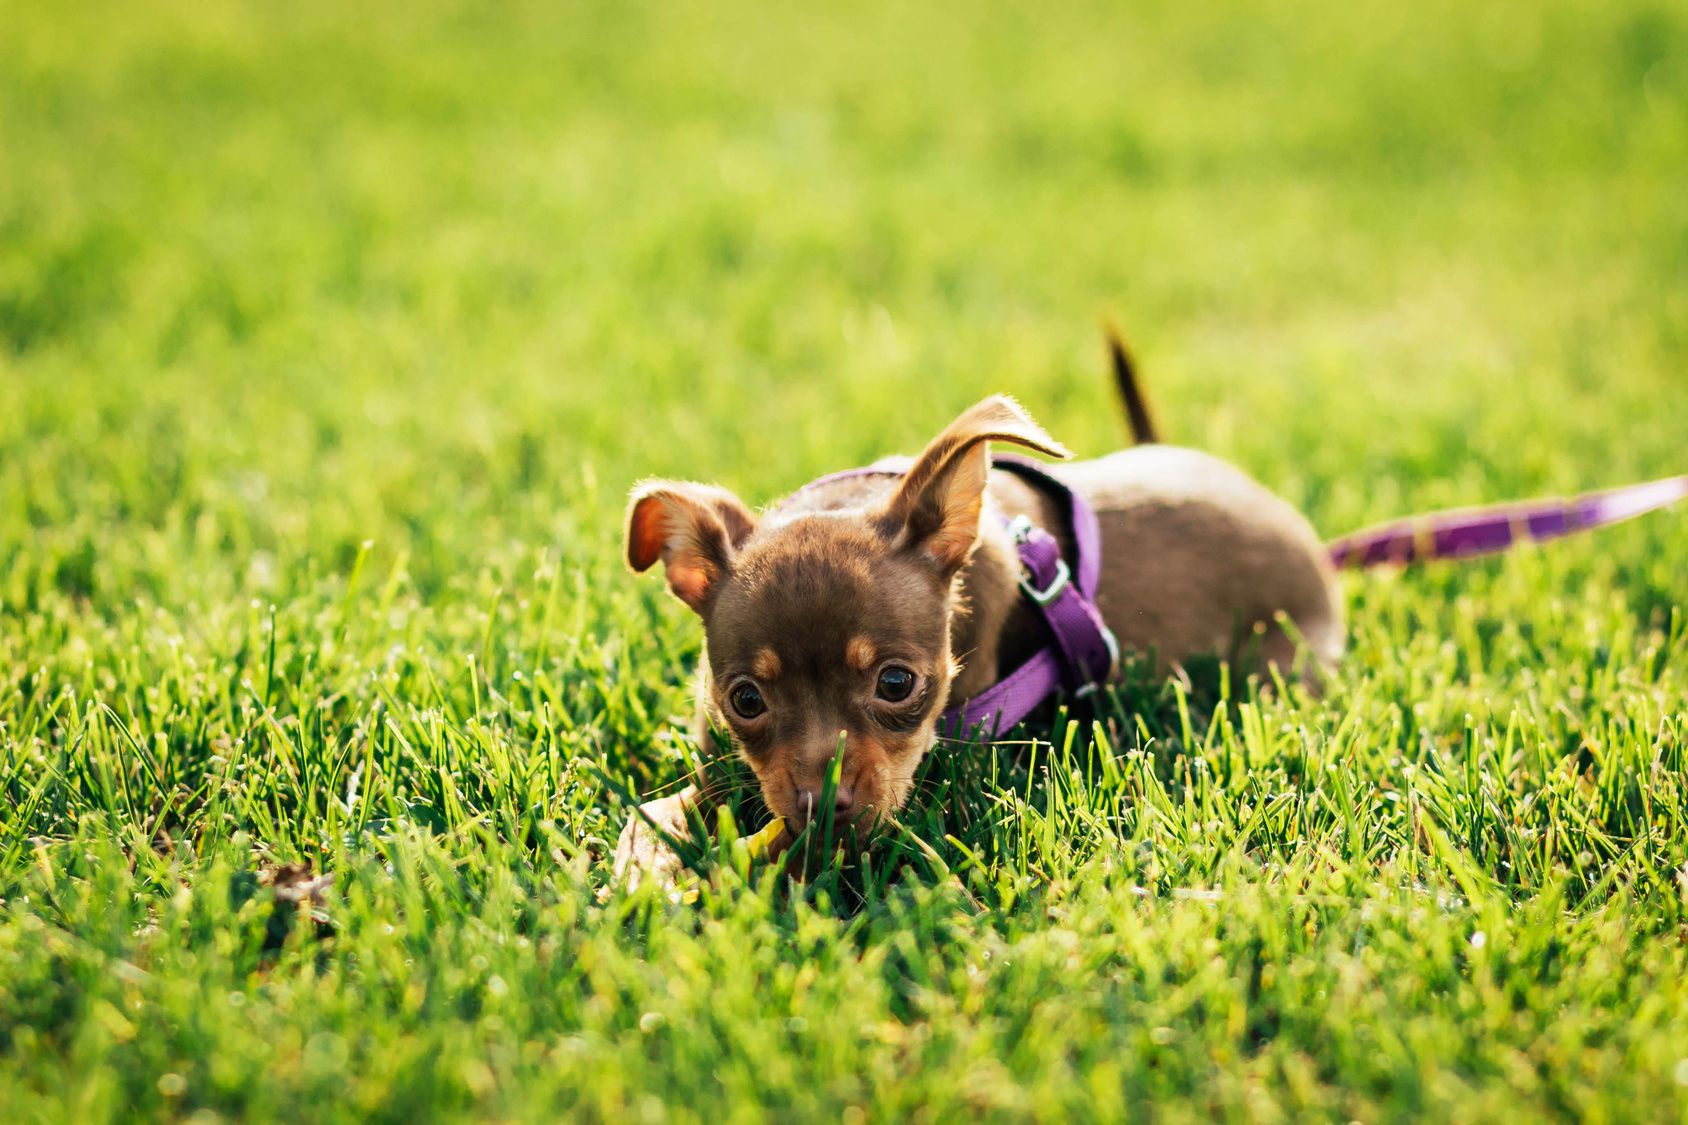 Puppy toy terrier lying n the grass